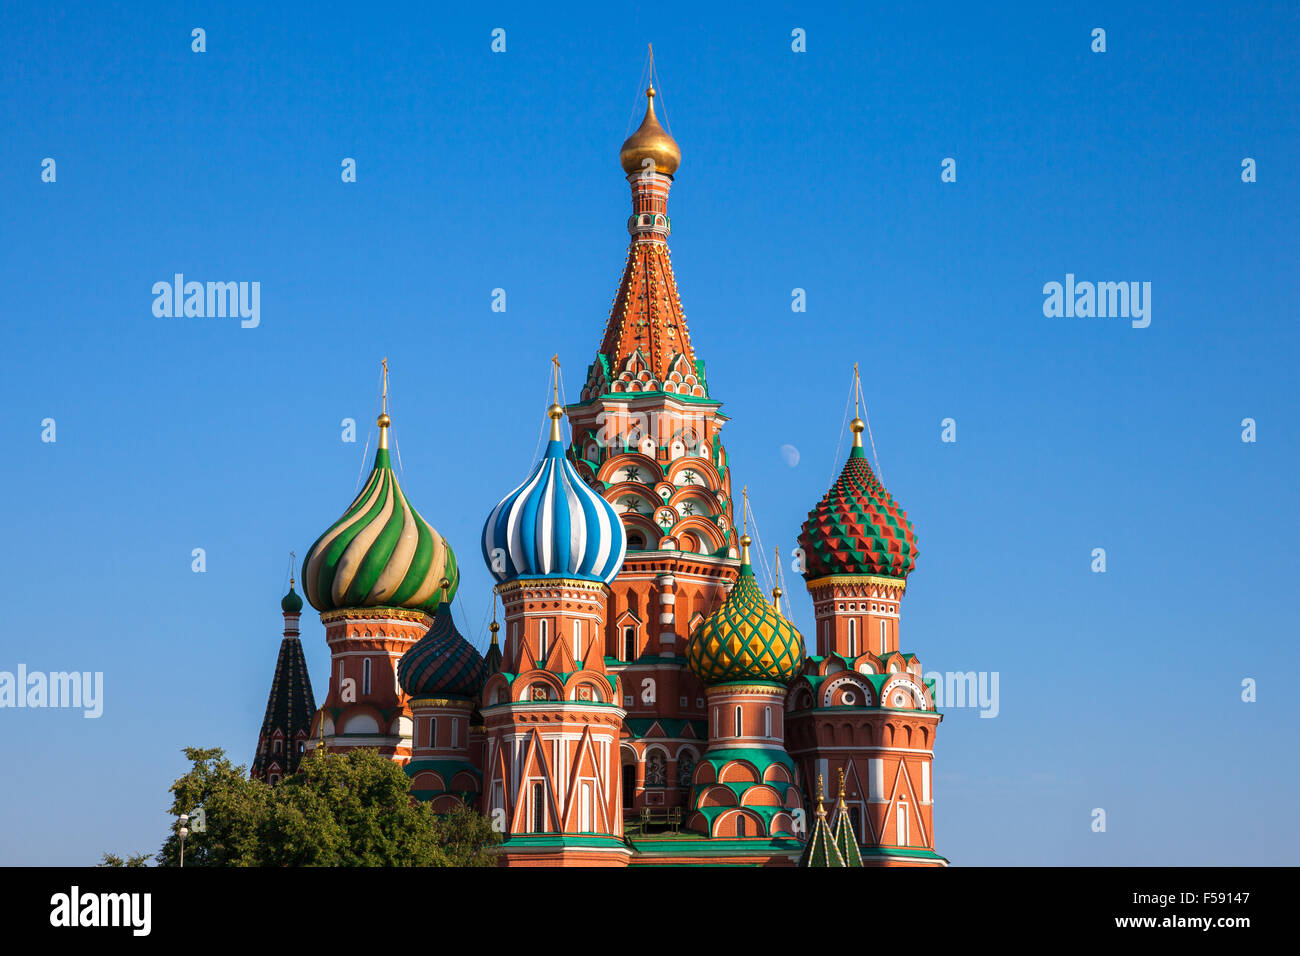 Close-up view of the famous Saint Basil's Cathedral with moon rising between its domes, Red Square, Moscow, Russia. Stock Photo